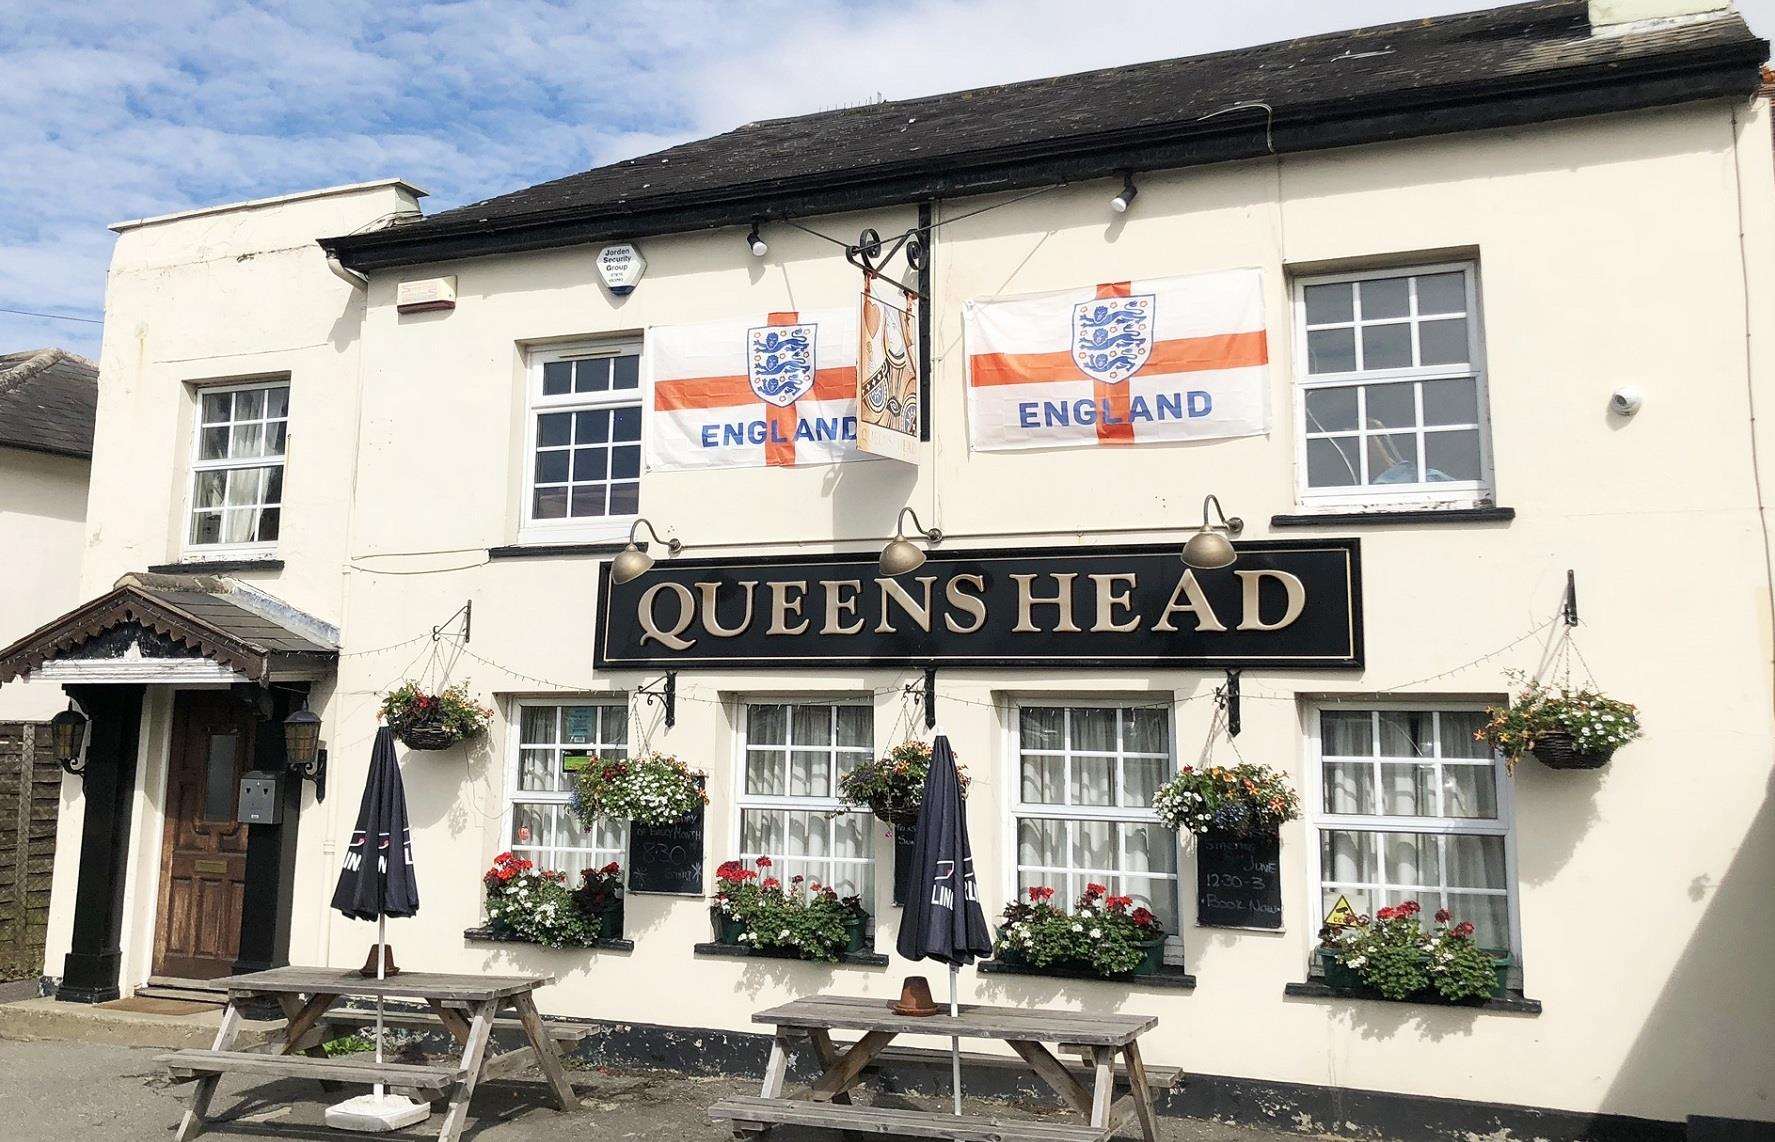 The freehold of the Queens Head pub in Five Oak Green is on the market for £295,000